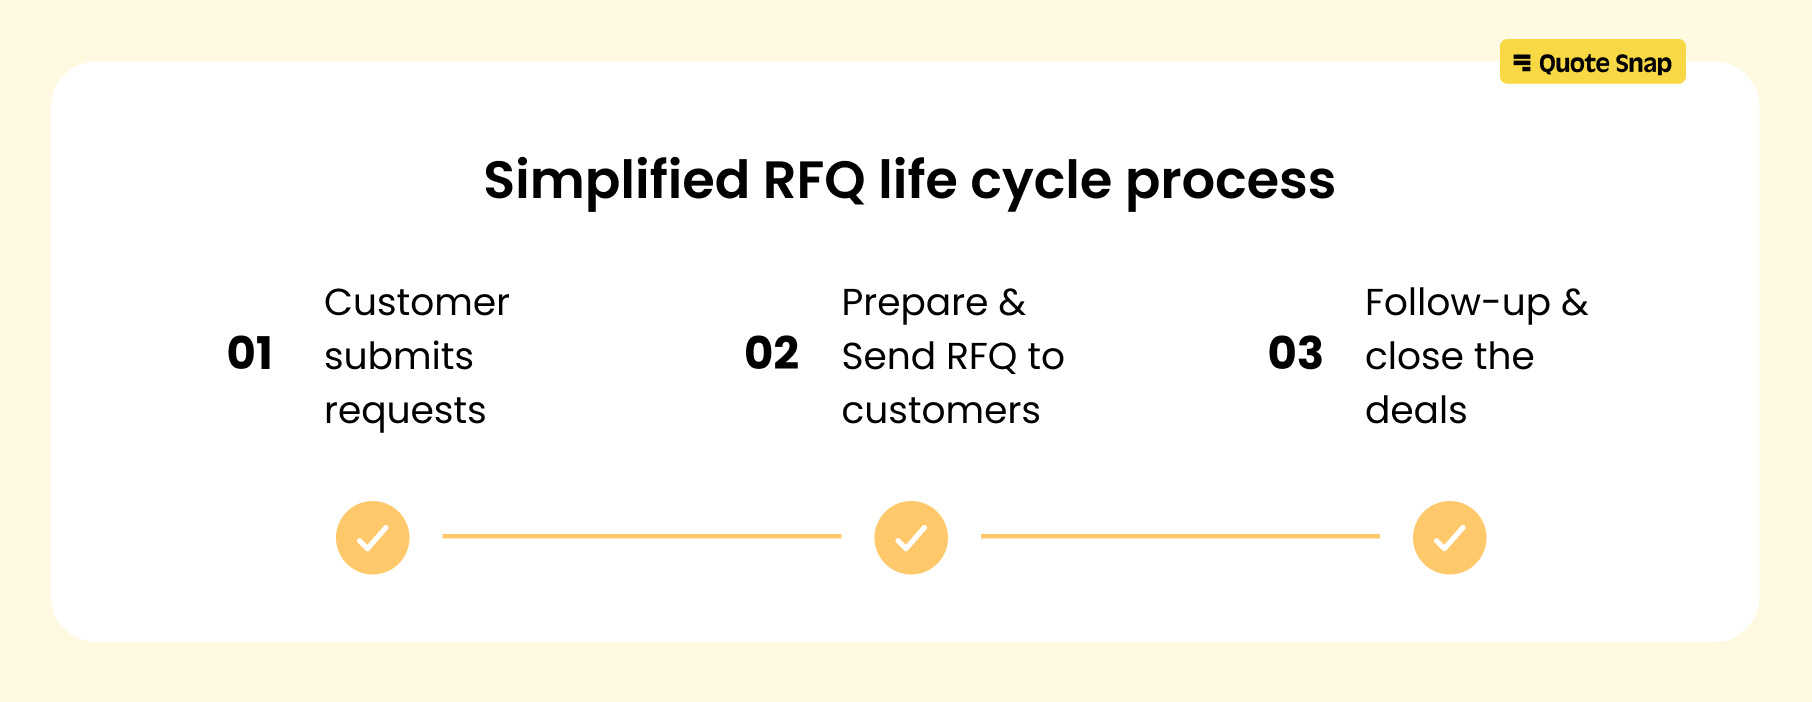 Simplified Request for quotation (RFQ) life cycle process